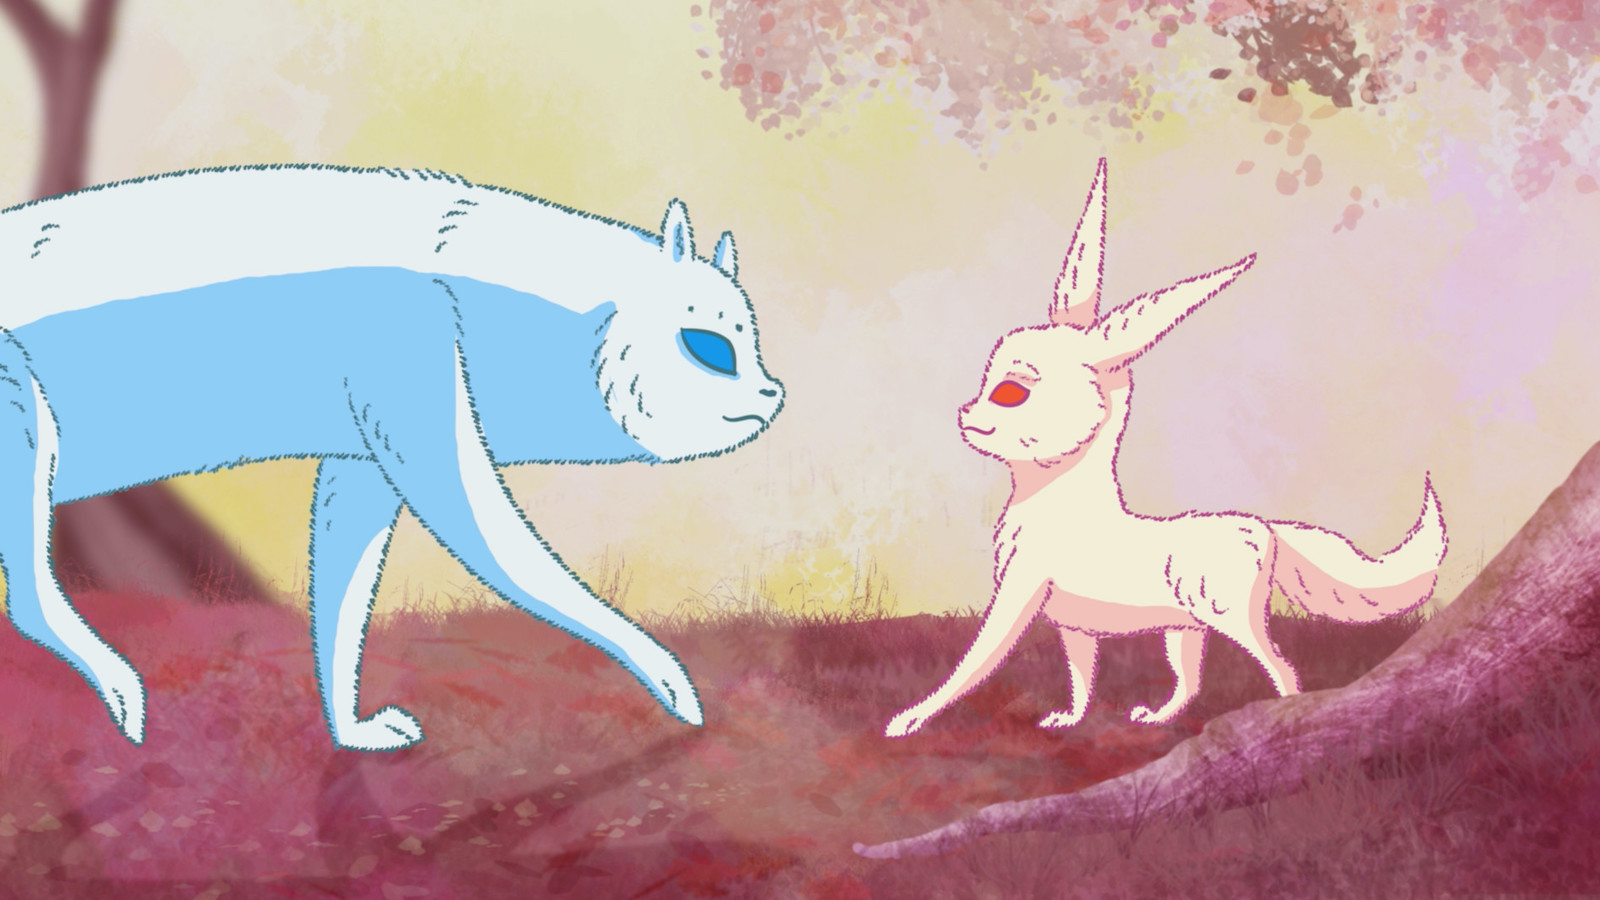 colorful drawing of big blue fox confronting a smaller red fox